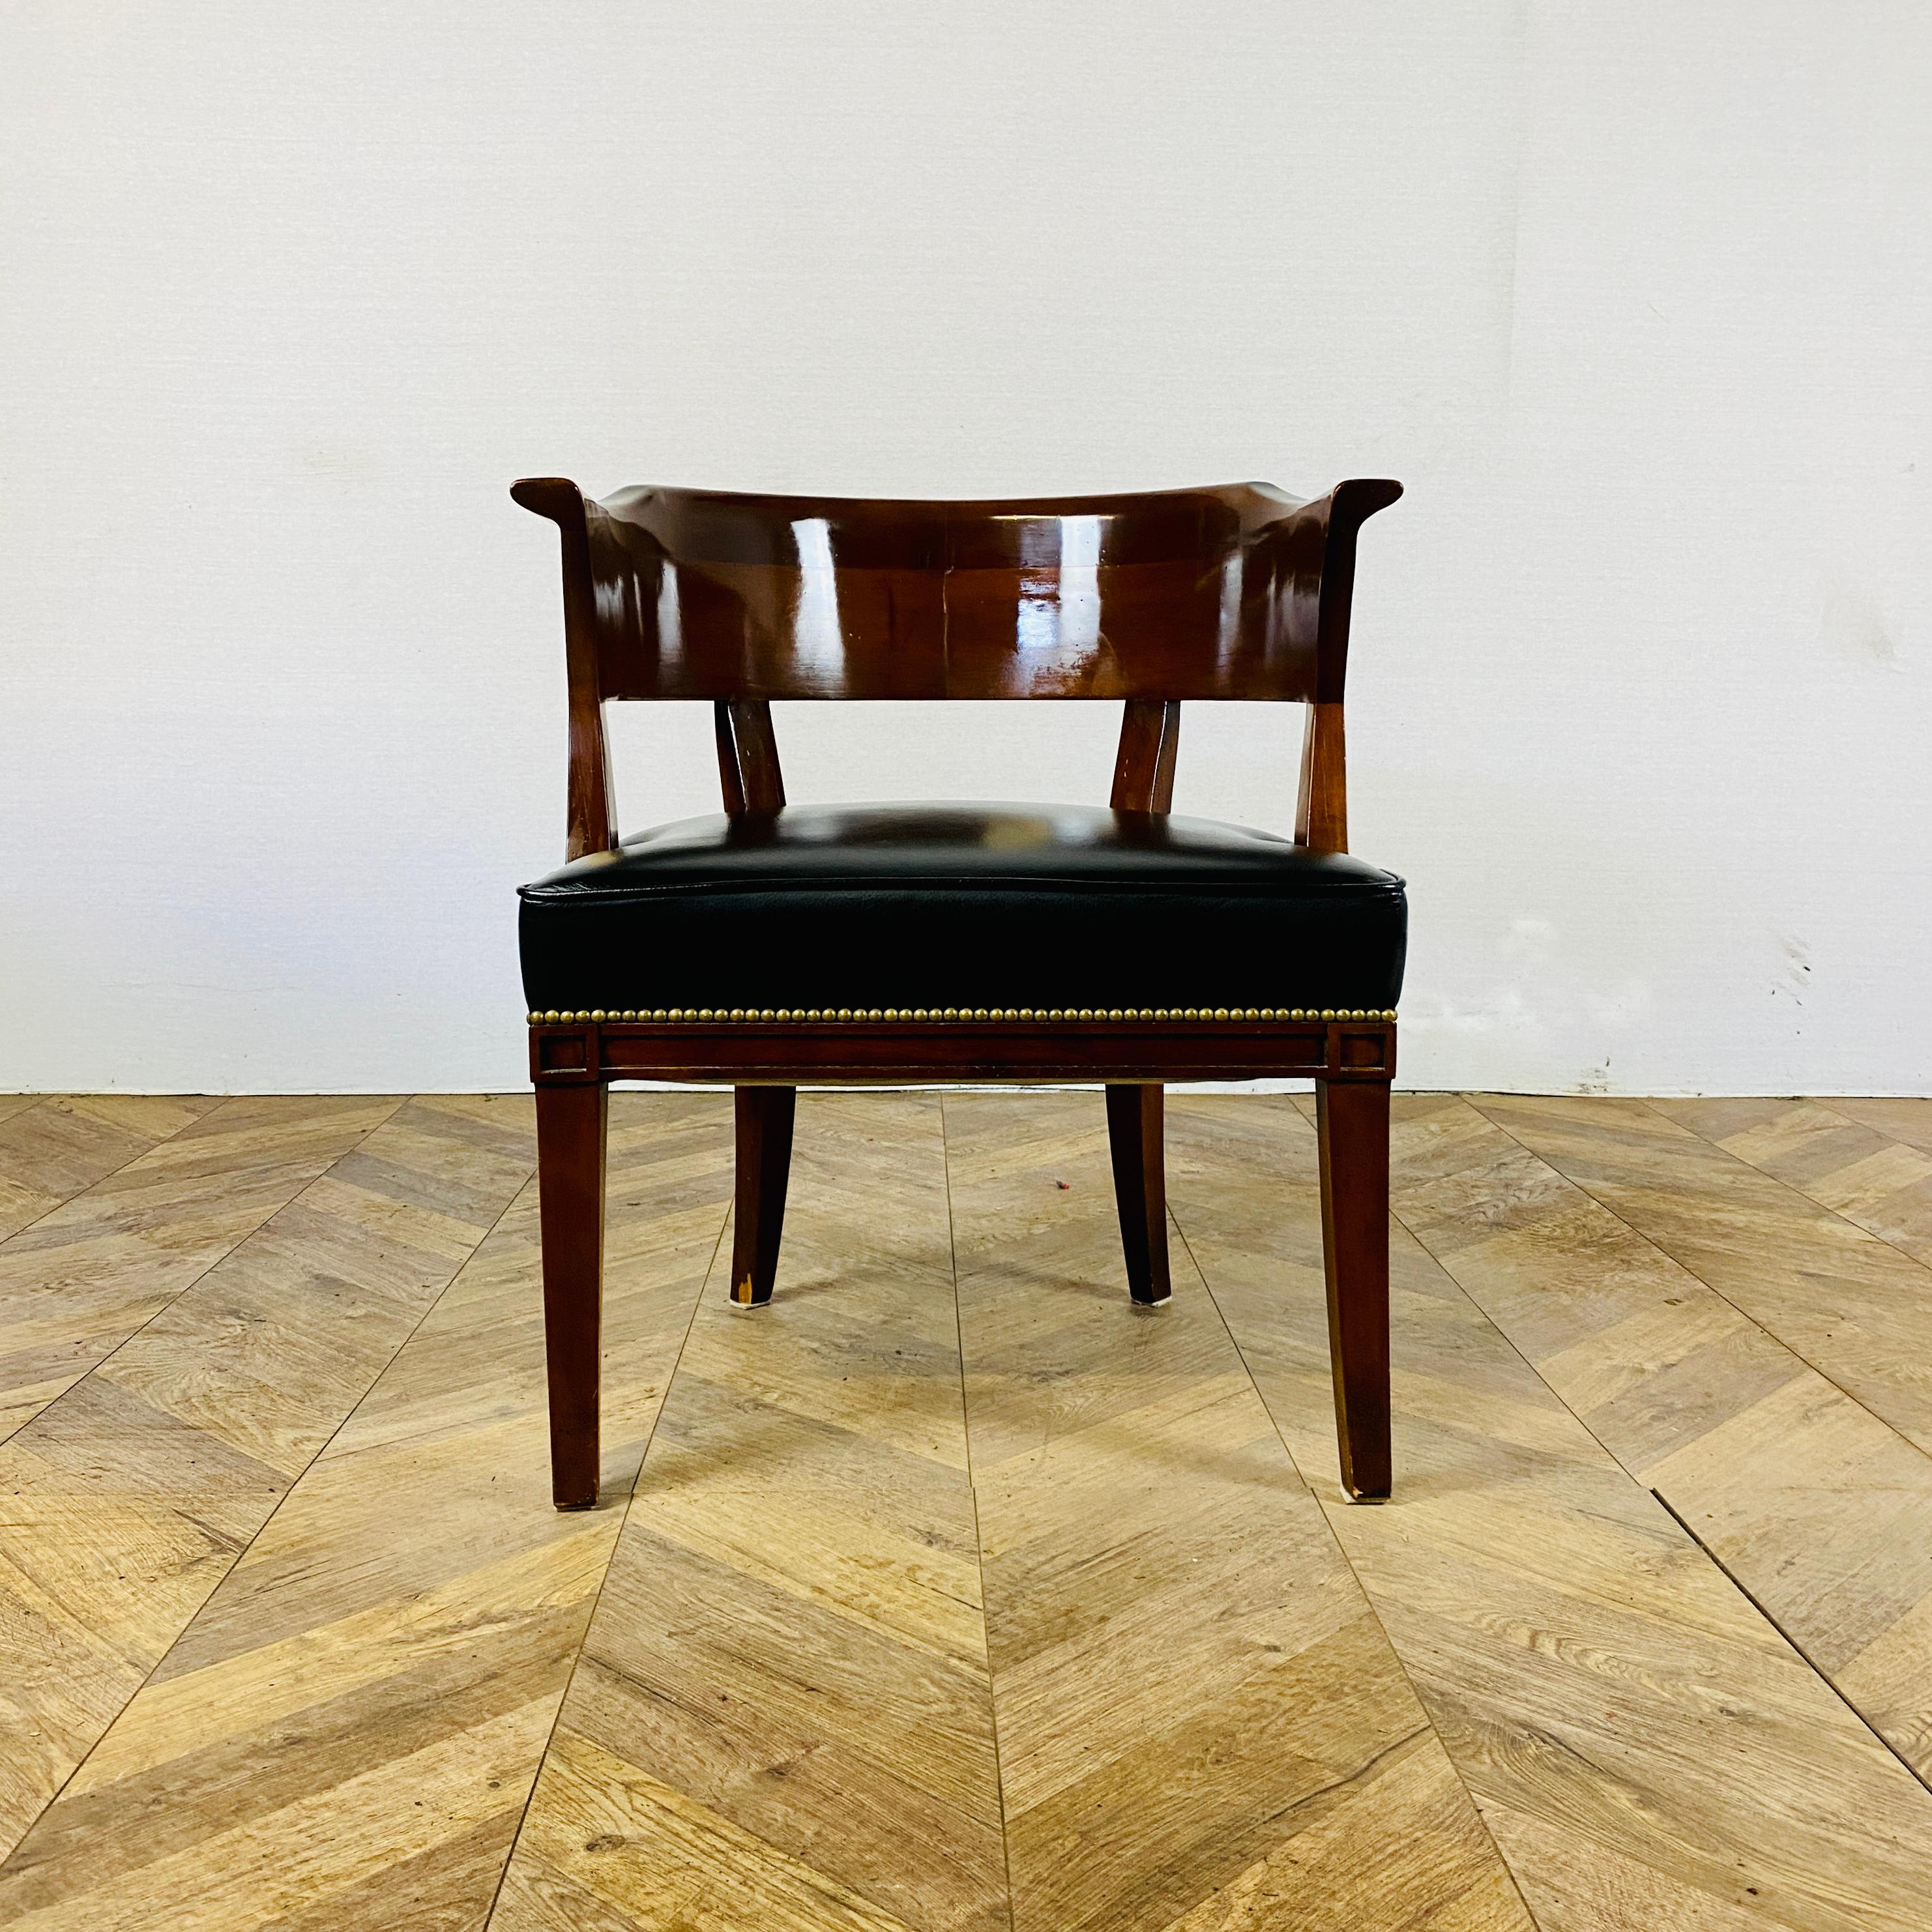 A Good Quality Rosewood & leather chair, circa 1980s.

Originally purchased from Harrods in London from new in the 1980s, the chair is super comfortable with black leather upholstery.

The chair does show small signs of wear to the frame with